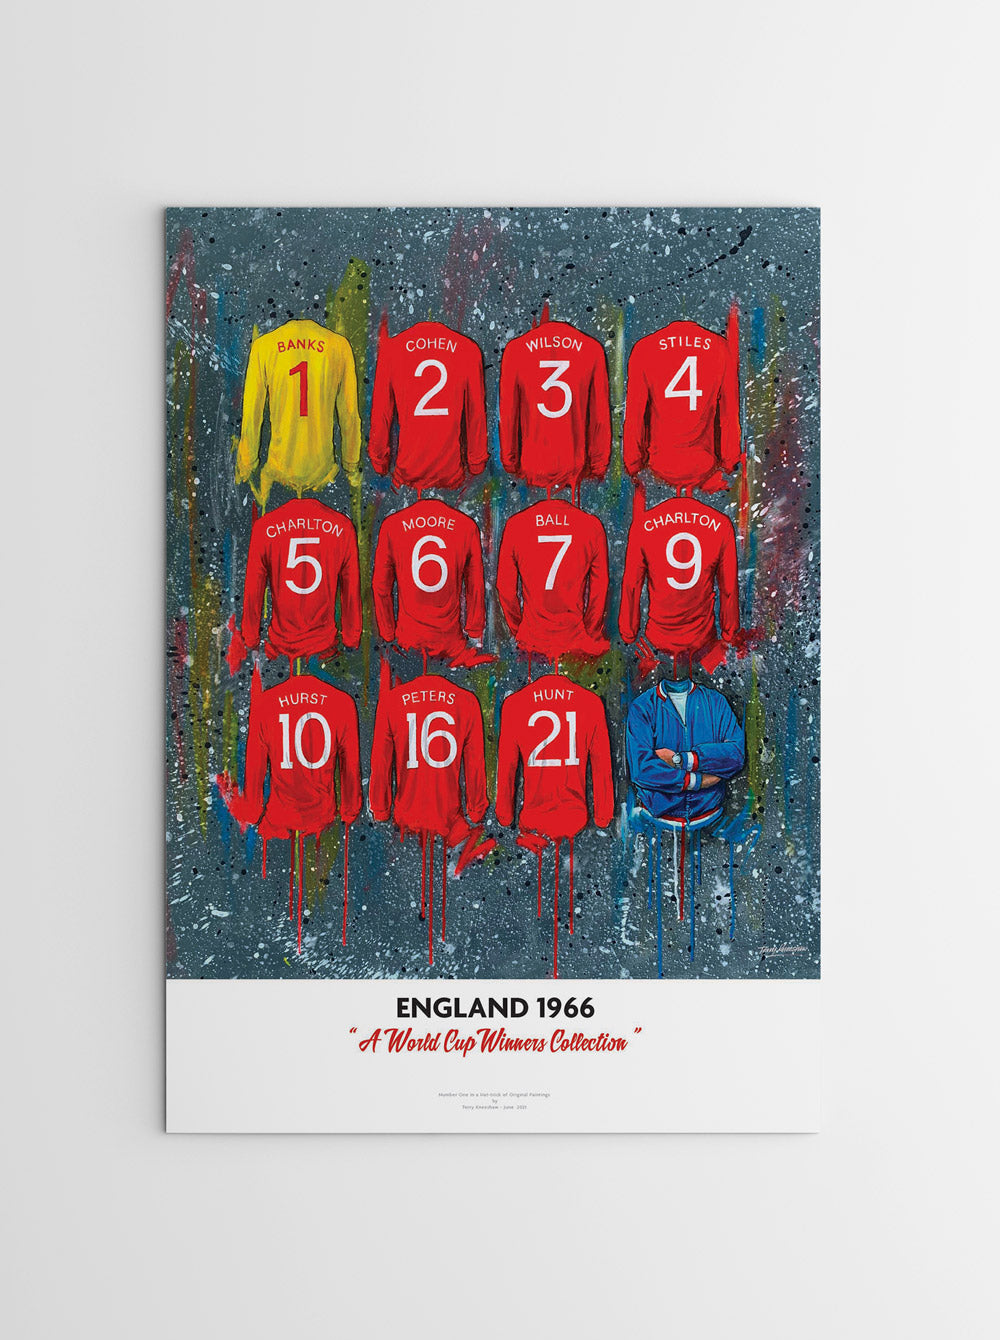 Artwork by Terry Kneeshaw depicting the England 1966 World Cup-winning team's sixteen iconic jerseys. The kits feature a predominantly white color scheme with red and blue accents, featuring the Three Lions crest, kit manufacturer, and shirt sponsor logos on the front. The artwork is a high-quality print of a hand-painted original, which uses textured brushstrokes to create a dynamic effect. 